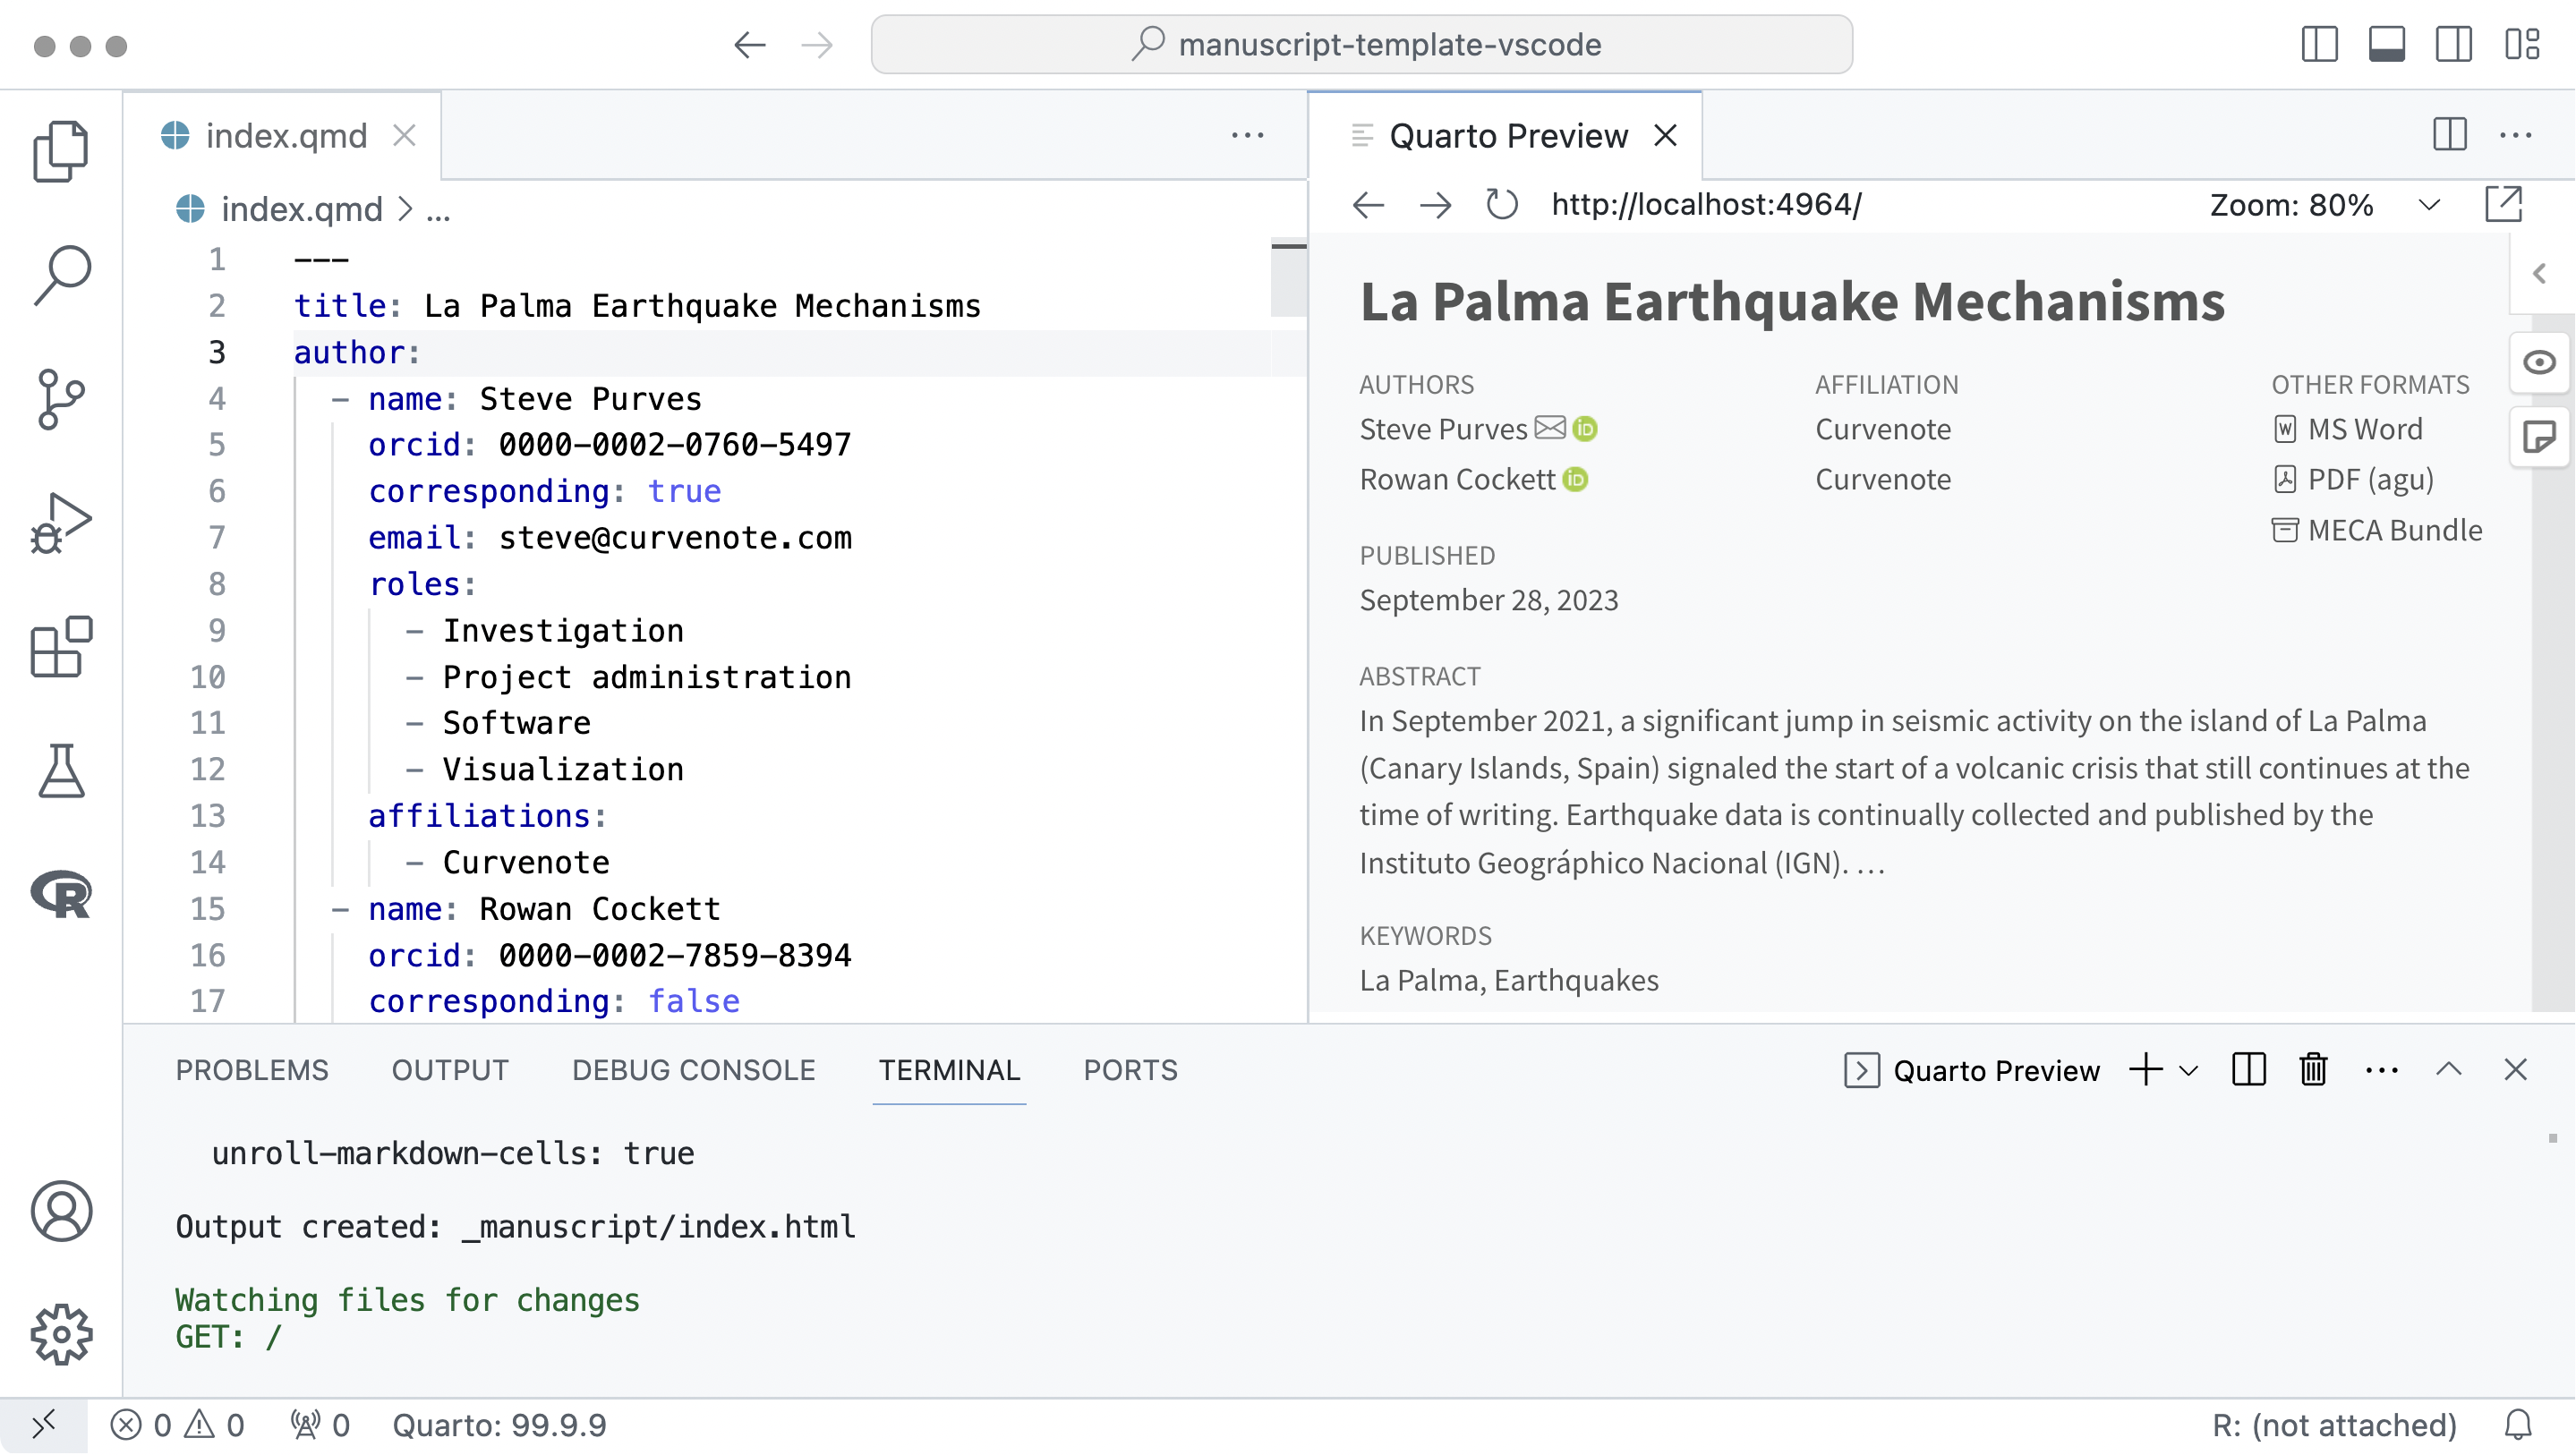 Screenshot of VS Code.  Open in an Editor pane is a file called index.qmd with the text, title: La Palma Earthquake Mechanisms. In the Quarto Preview pane is an article webpage with the title La Palma Earthquake Mechanisms.